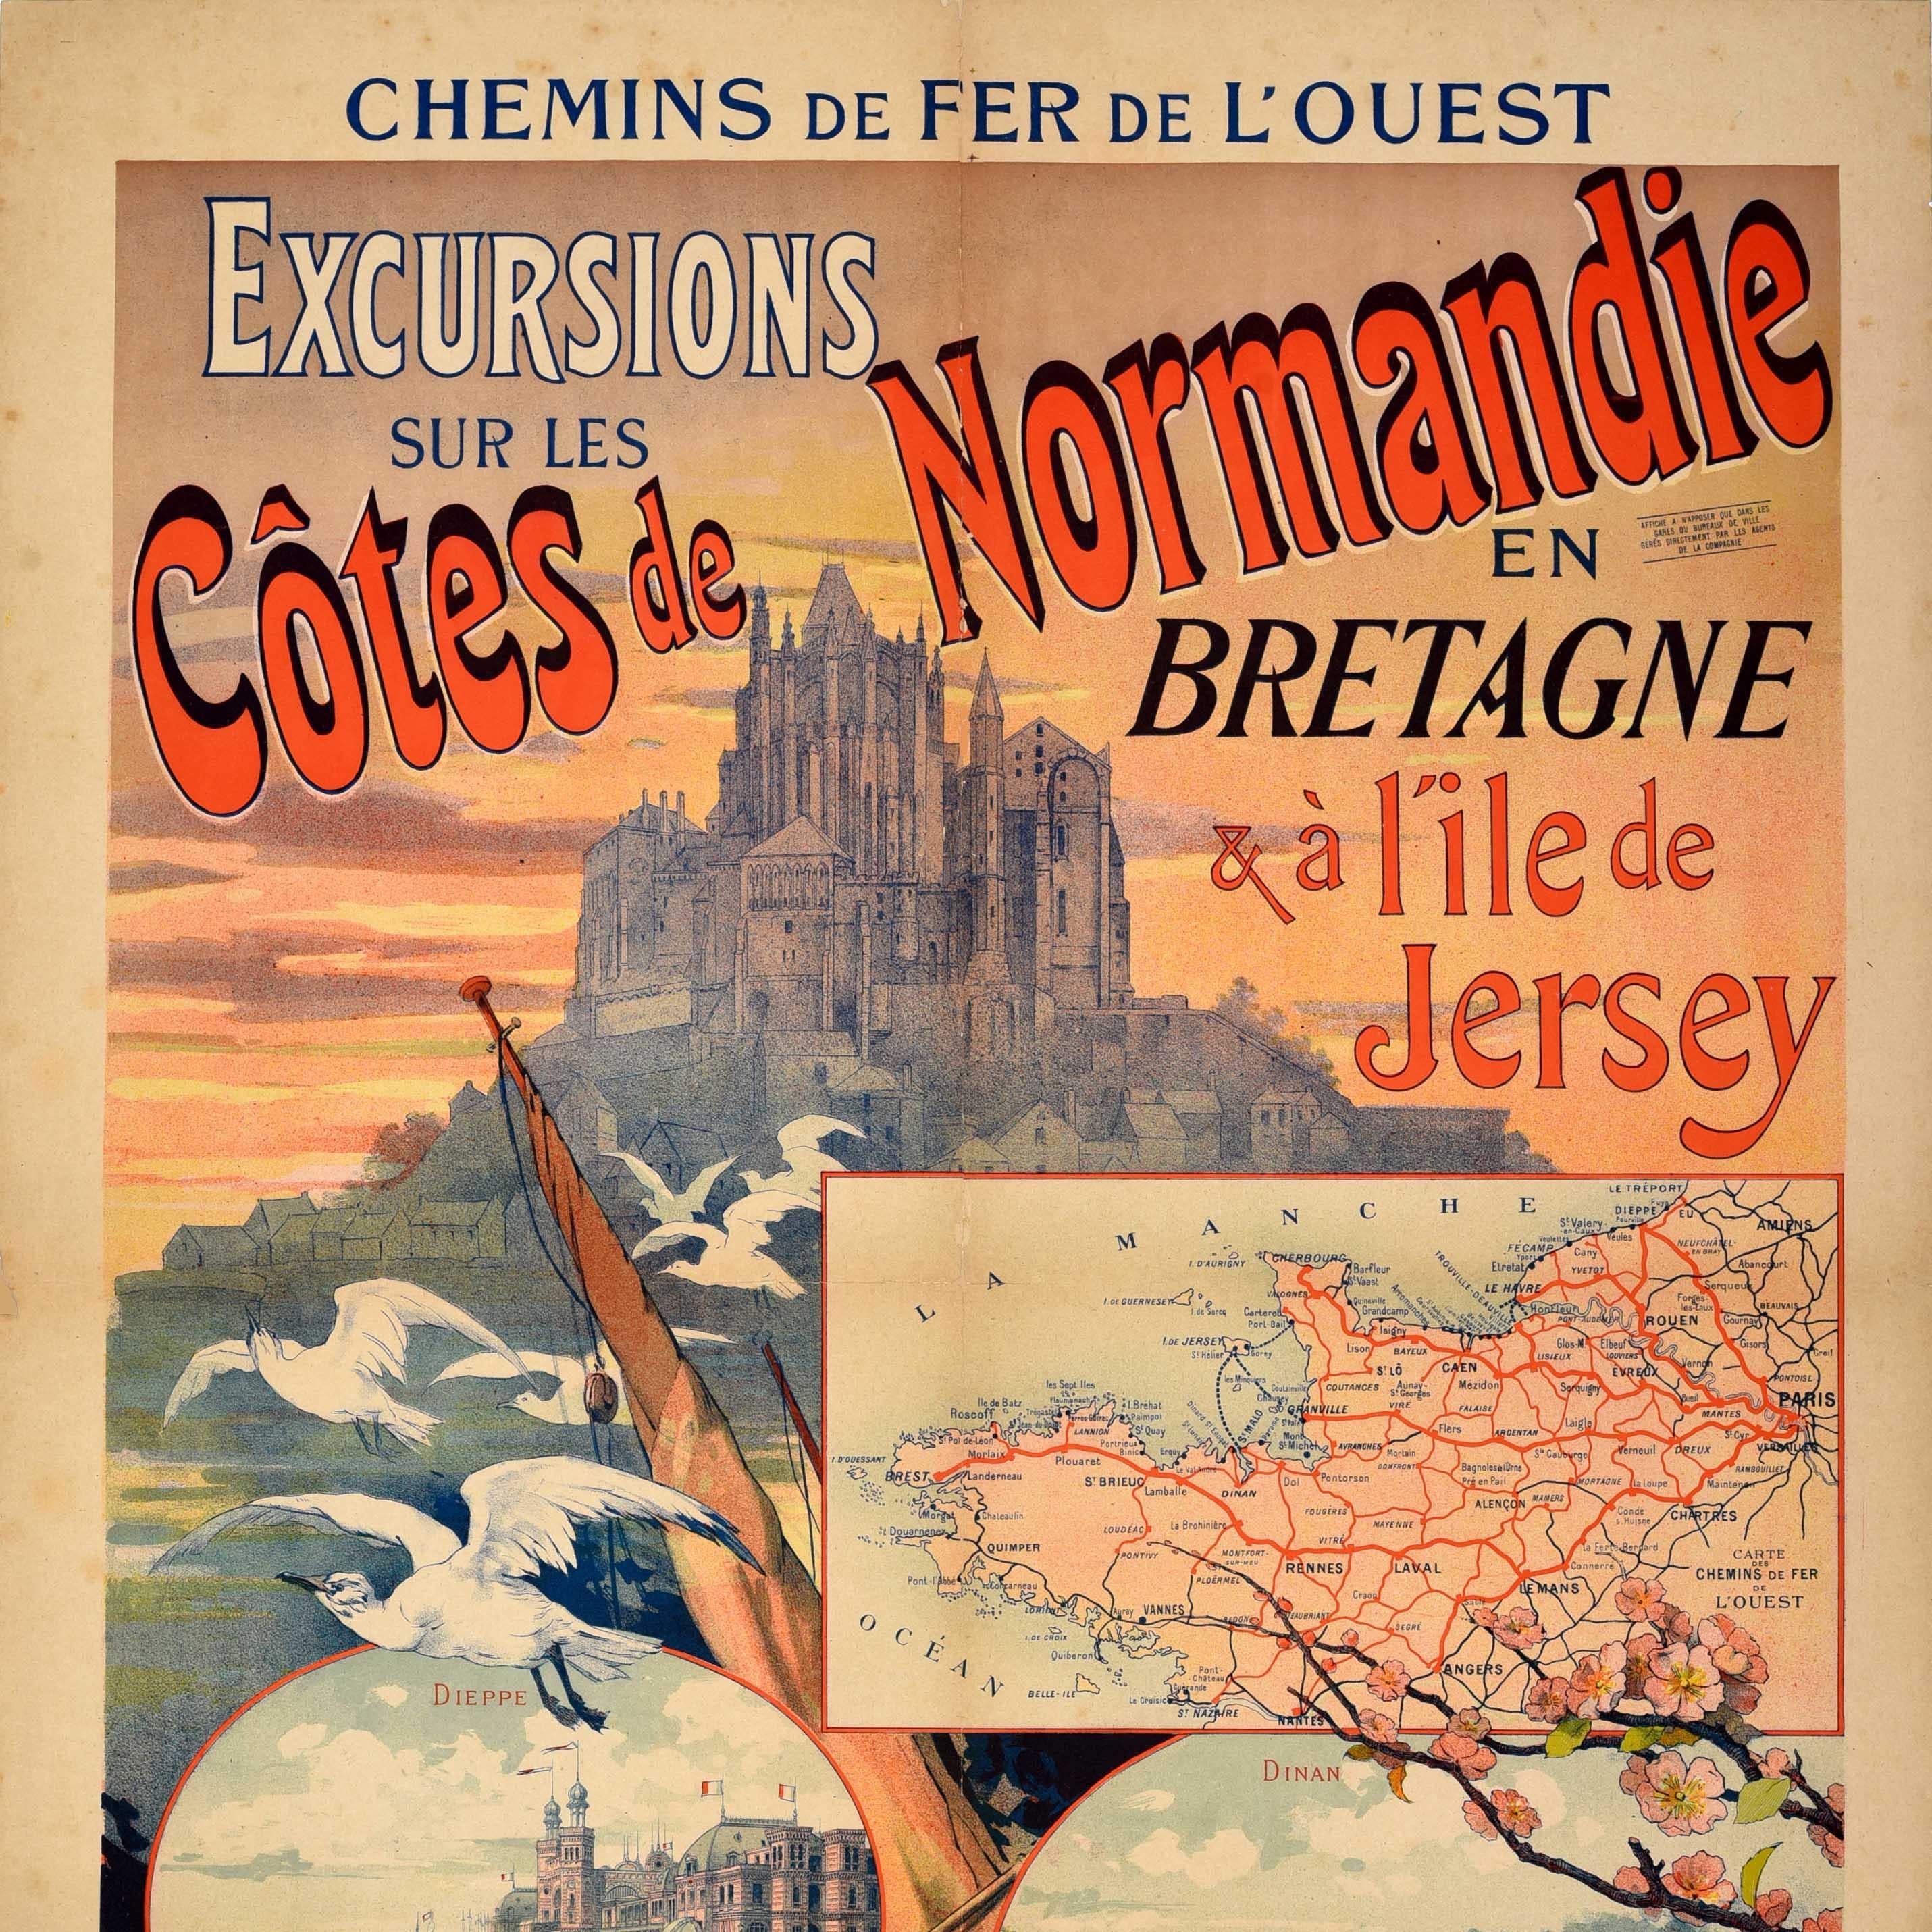 French Original Antique Train Travel Poster Normandy Brittany Jersey Coast Excursions